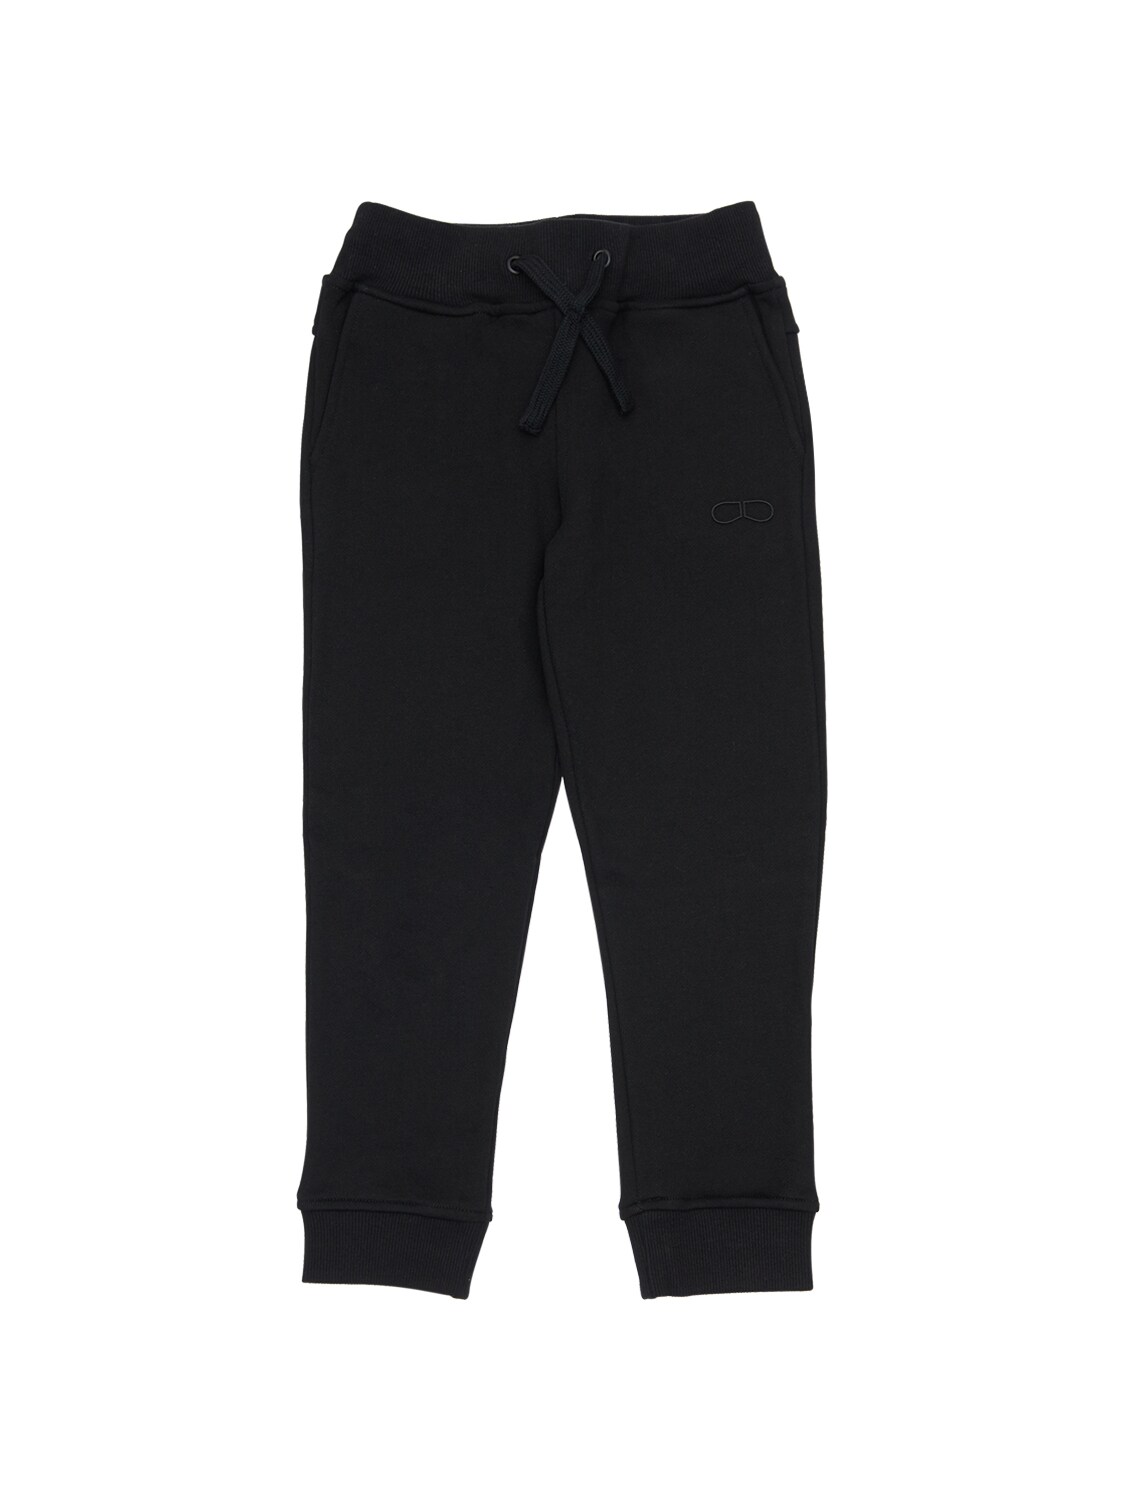 Ai Riders On The Storm Kids' Cotton Sweatpants In Black